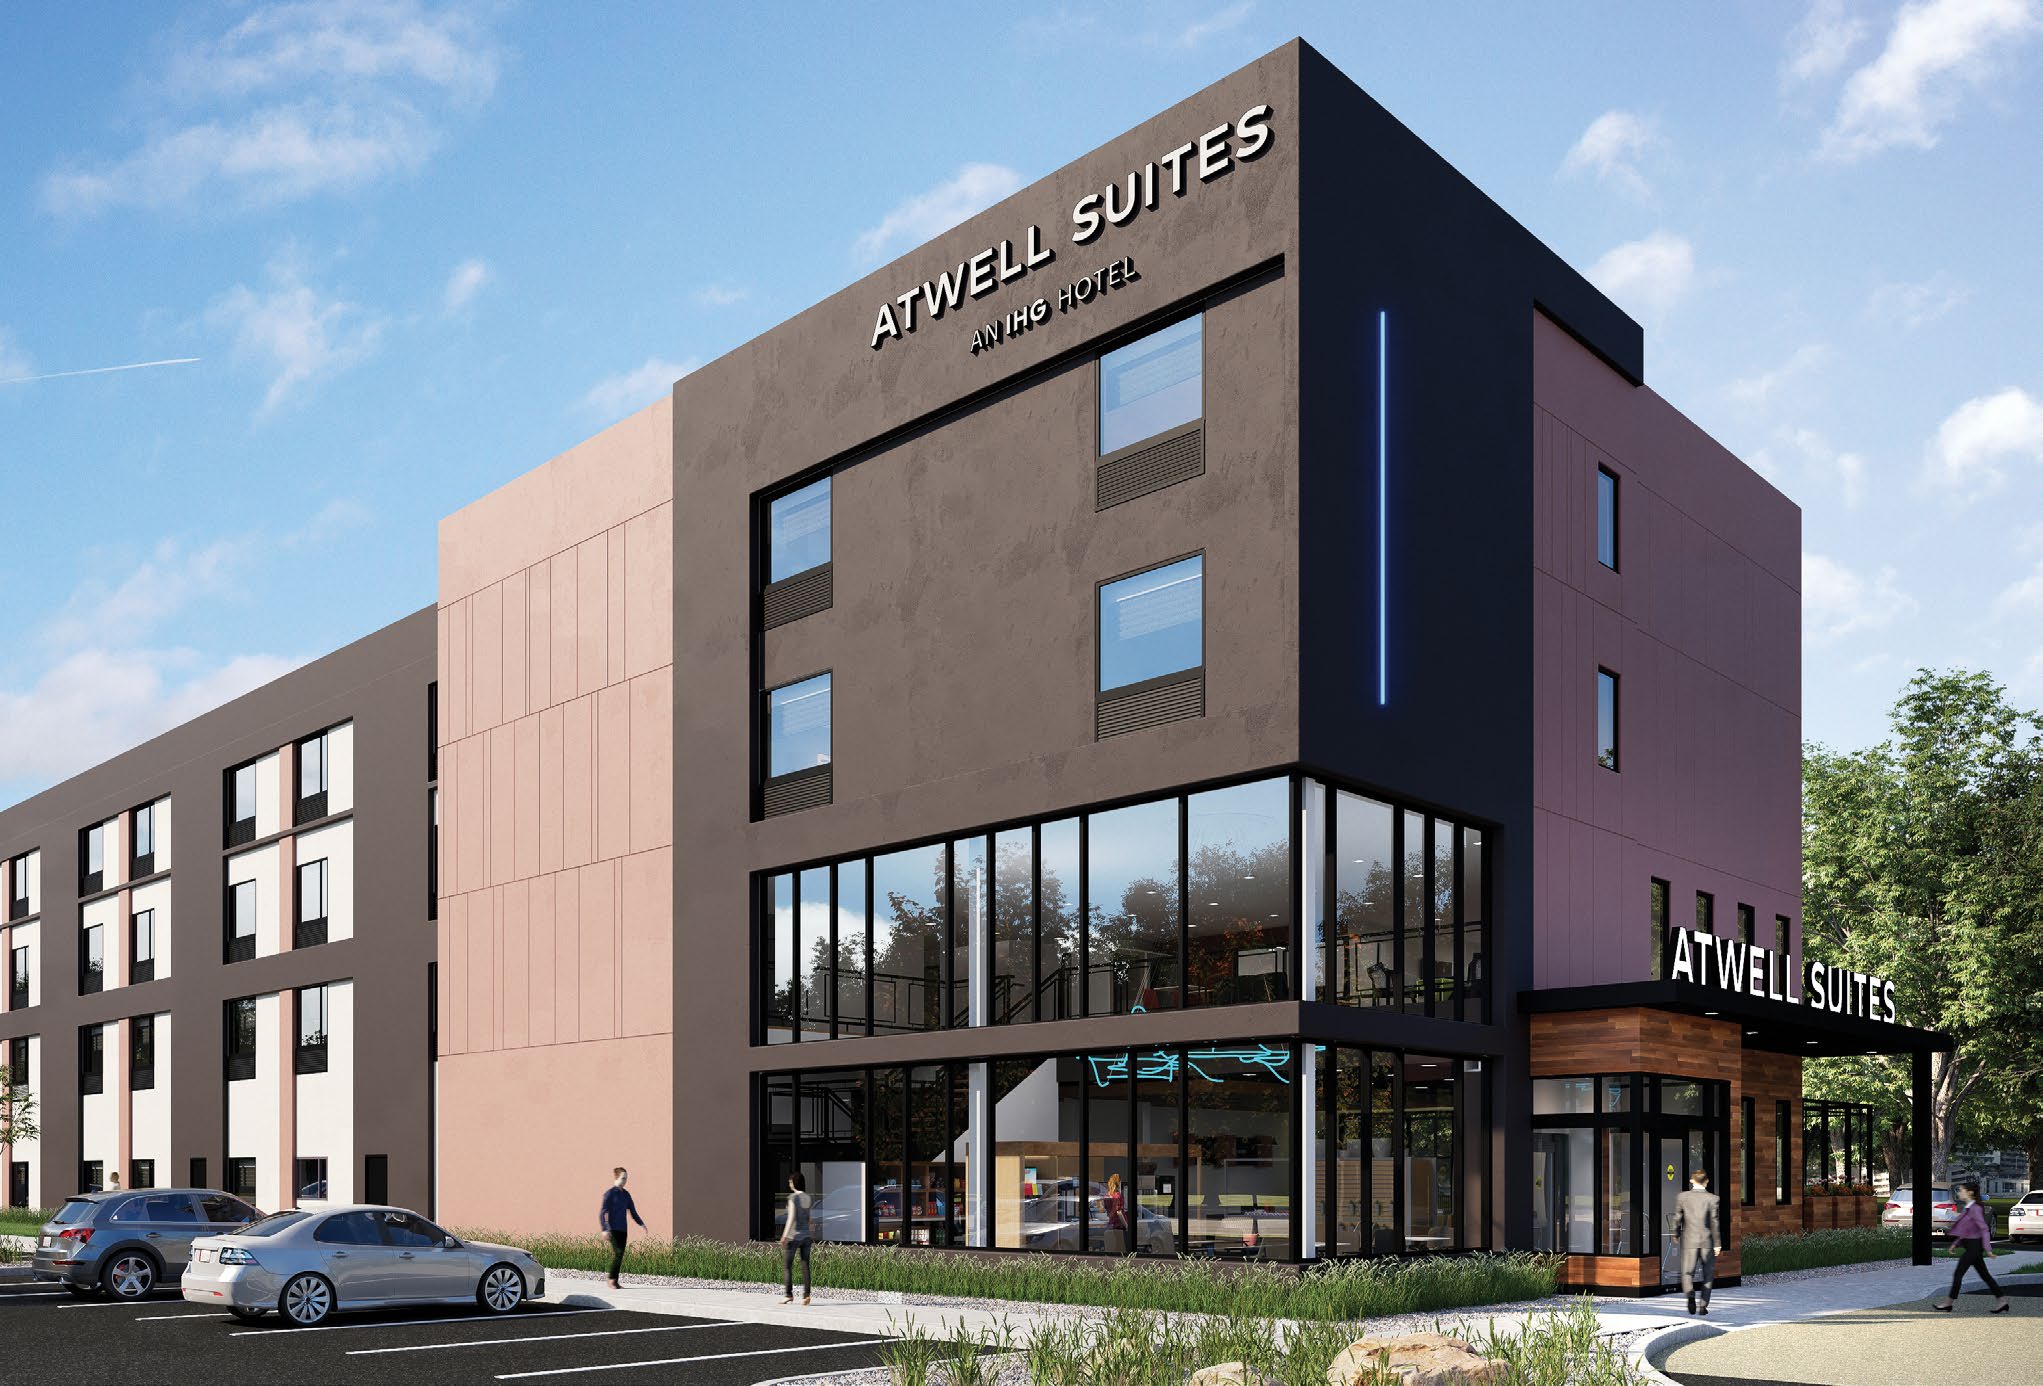 Atwell Suites Hotel Site Sold